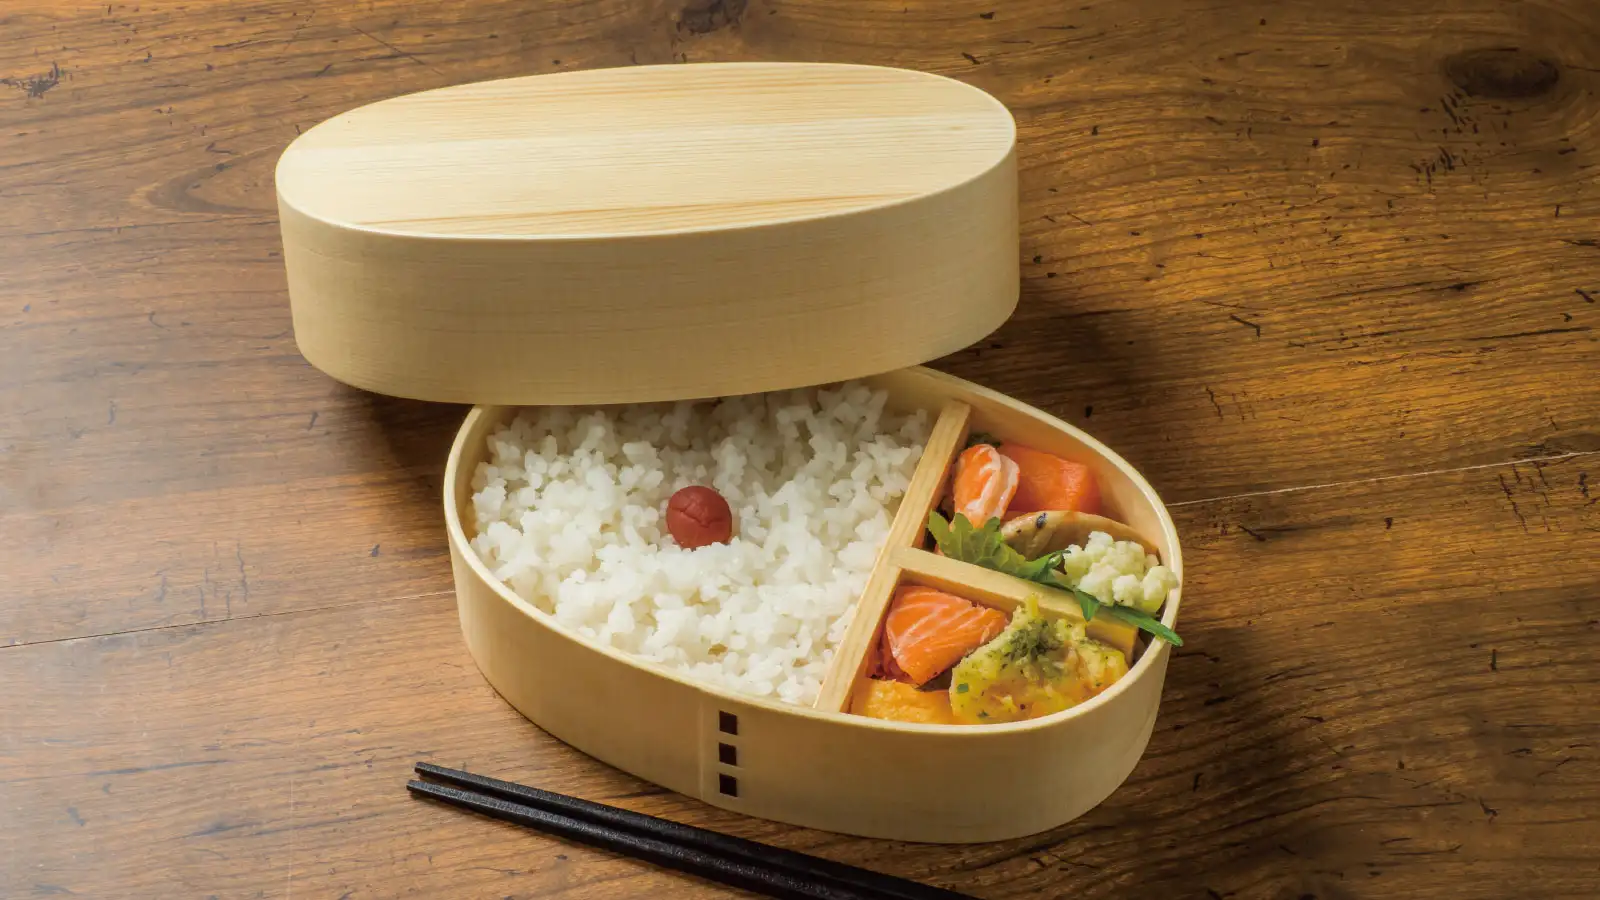 Japanese Bento Boxes for a Balanced Meal | The Japan Media